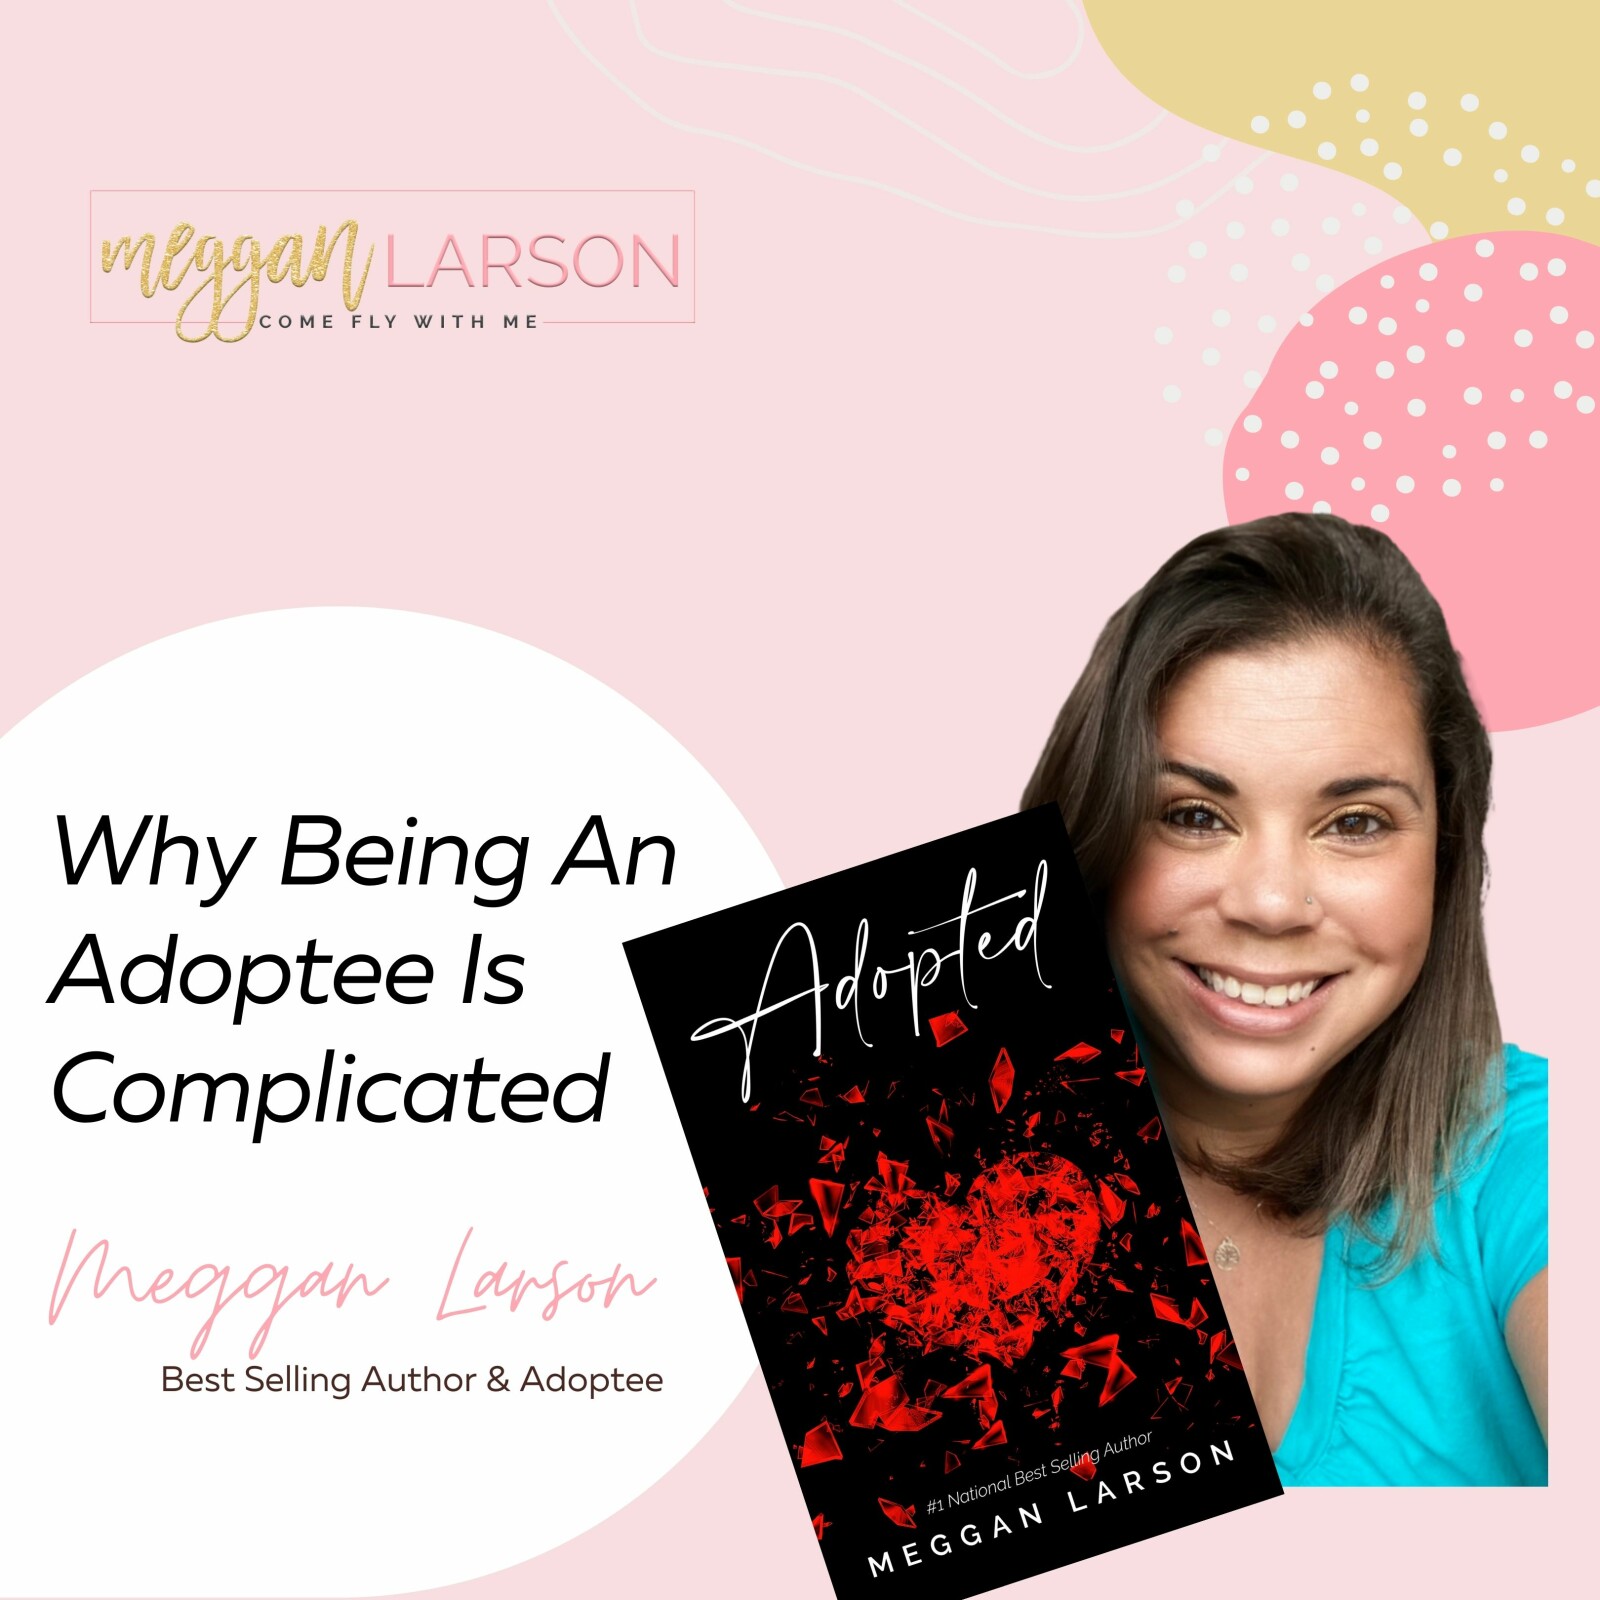 Why Being An Adoptee Is Complicated